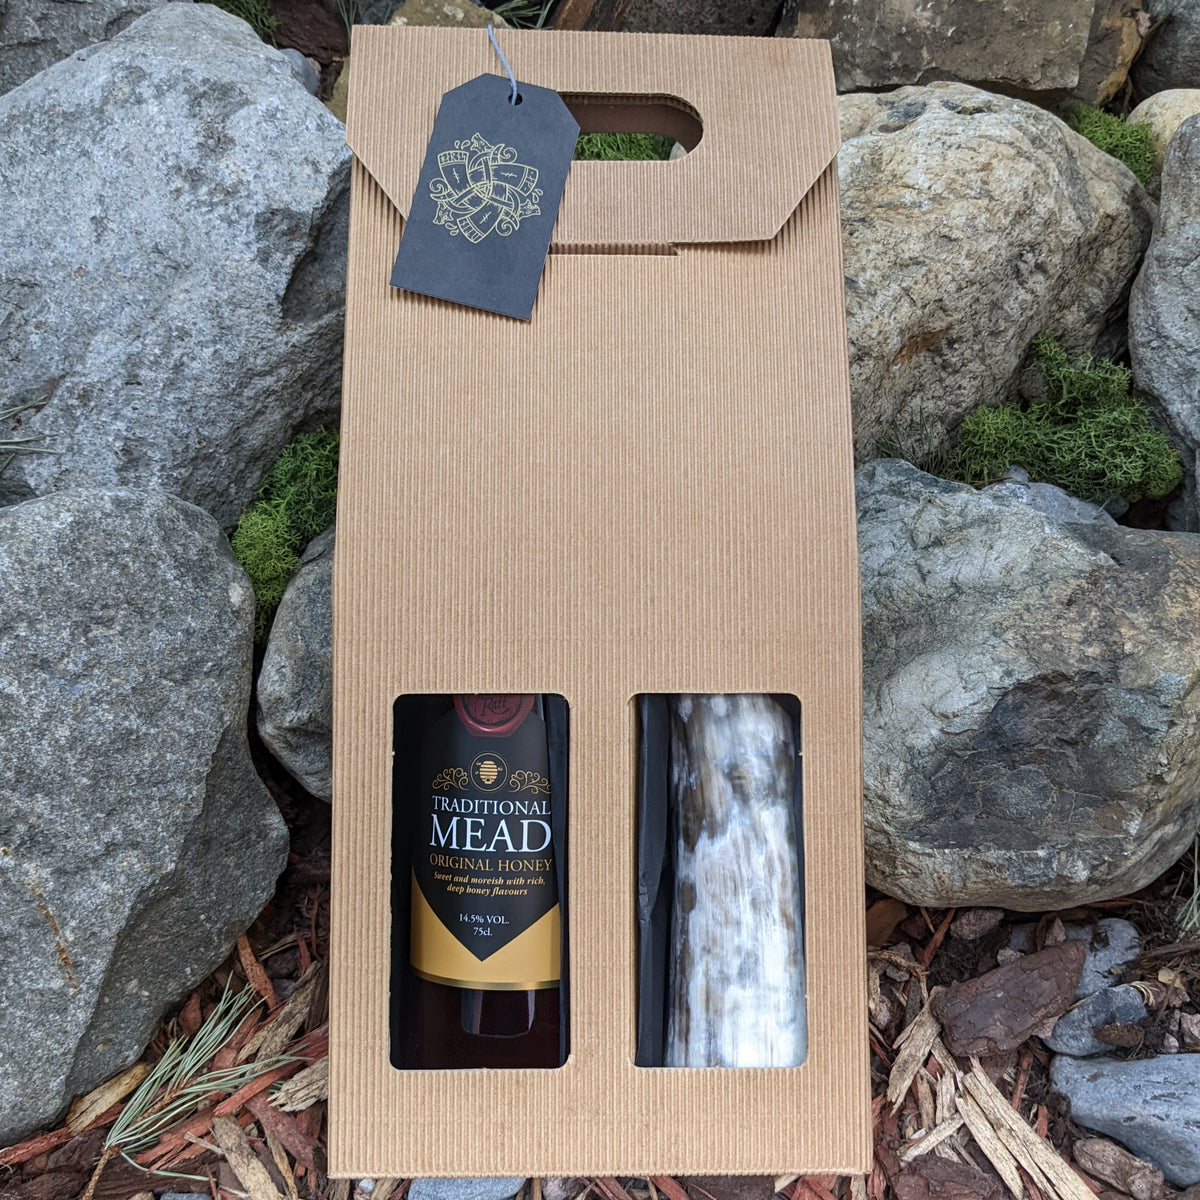 Drinking horn Gift Set- Lyme Bay Traditional Mead 75cl 14.5% Vol, 250-400ml Drinking horn, Gift box and Horns of Odin Gift Tag 